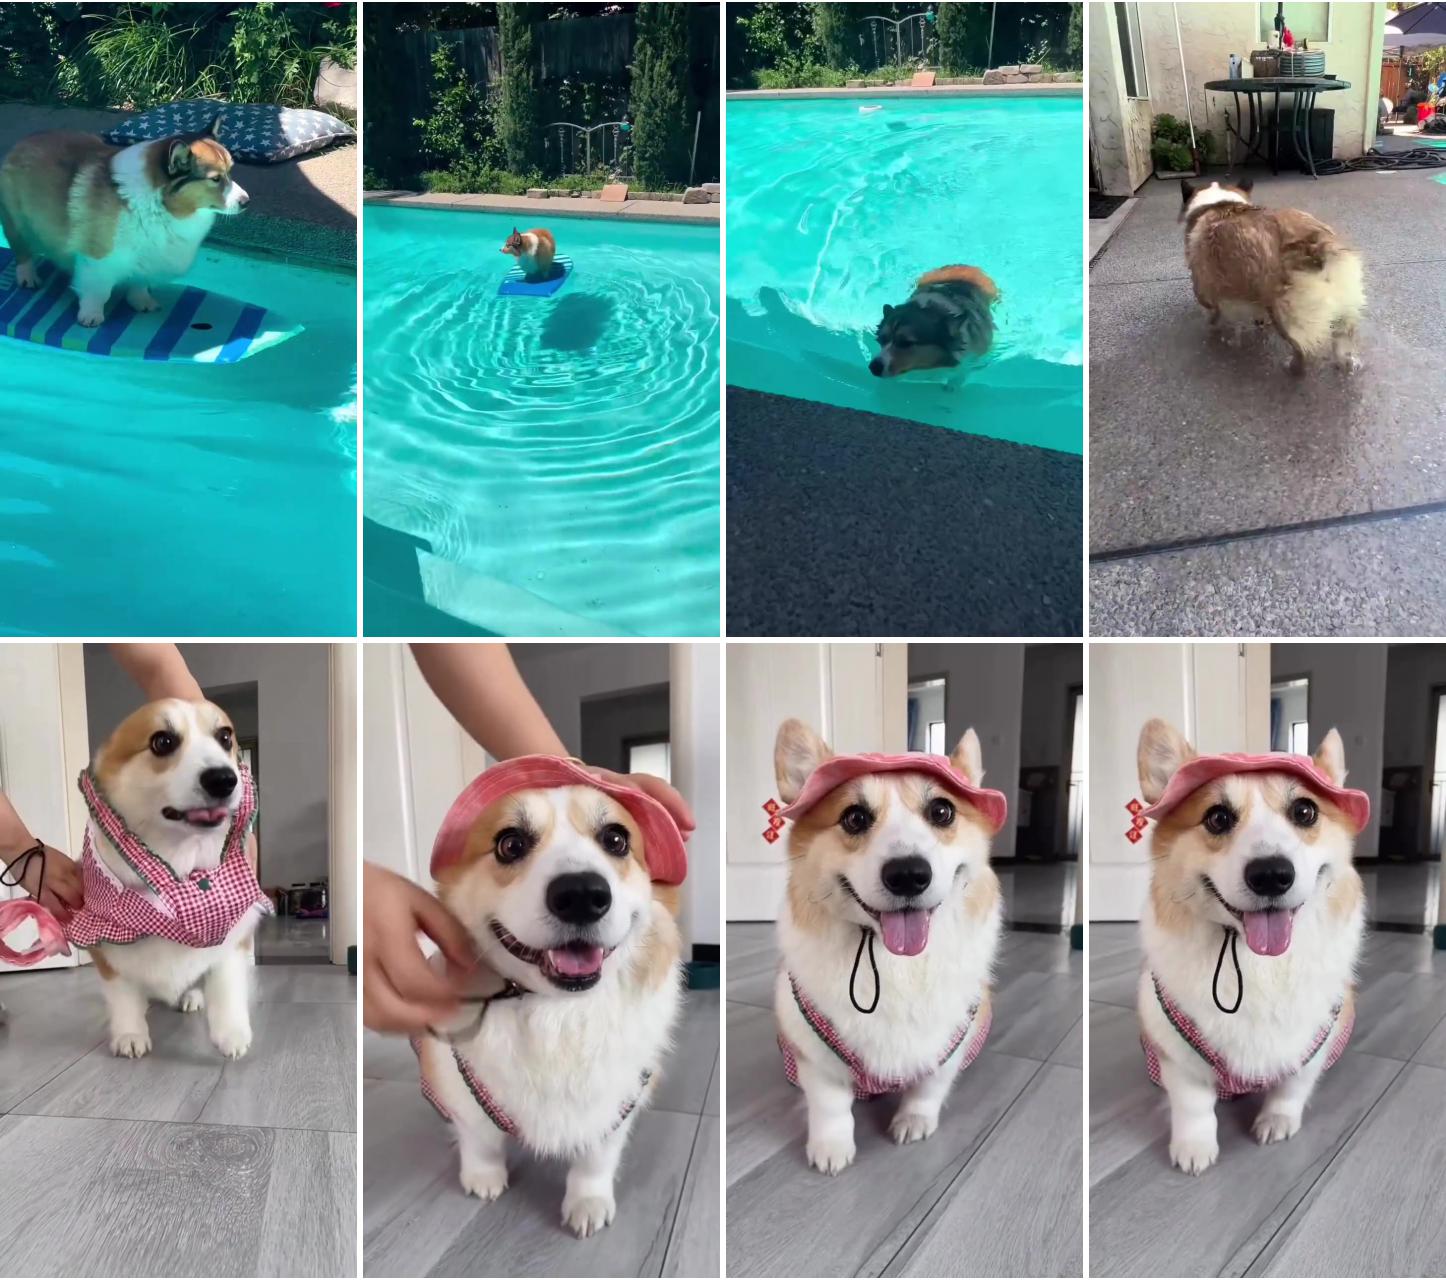  hilarious corgi dog takes a splash in the pool: adorable swimming moments of this cute pup ;  adorable corgi puppy in cute dog clothes, funny and cute moments, pinterest video pin 